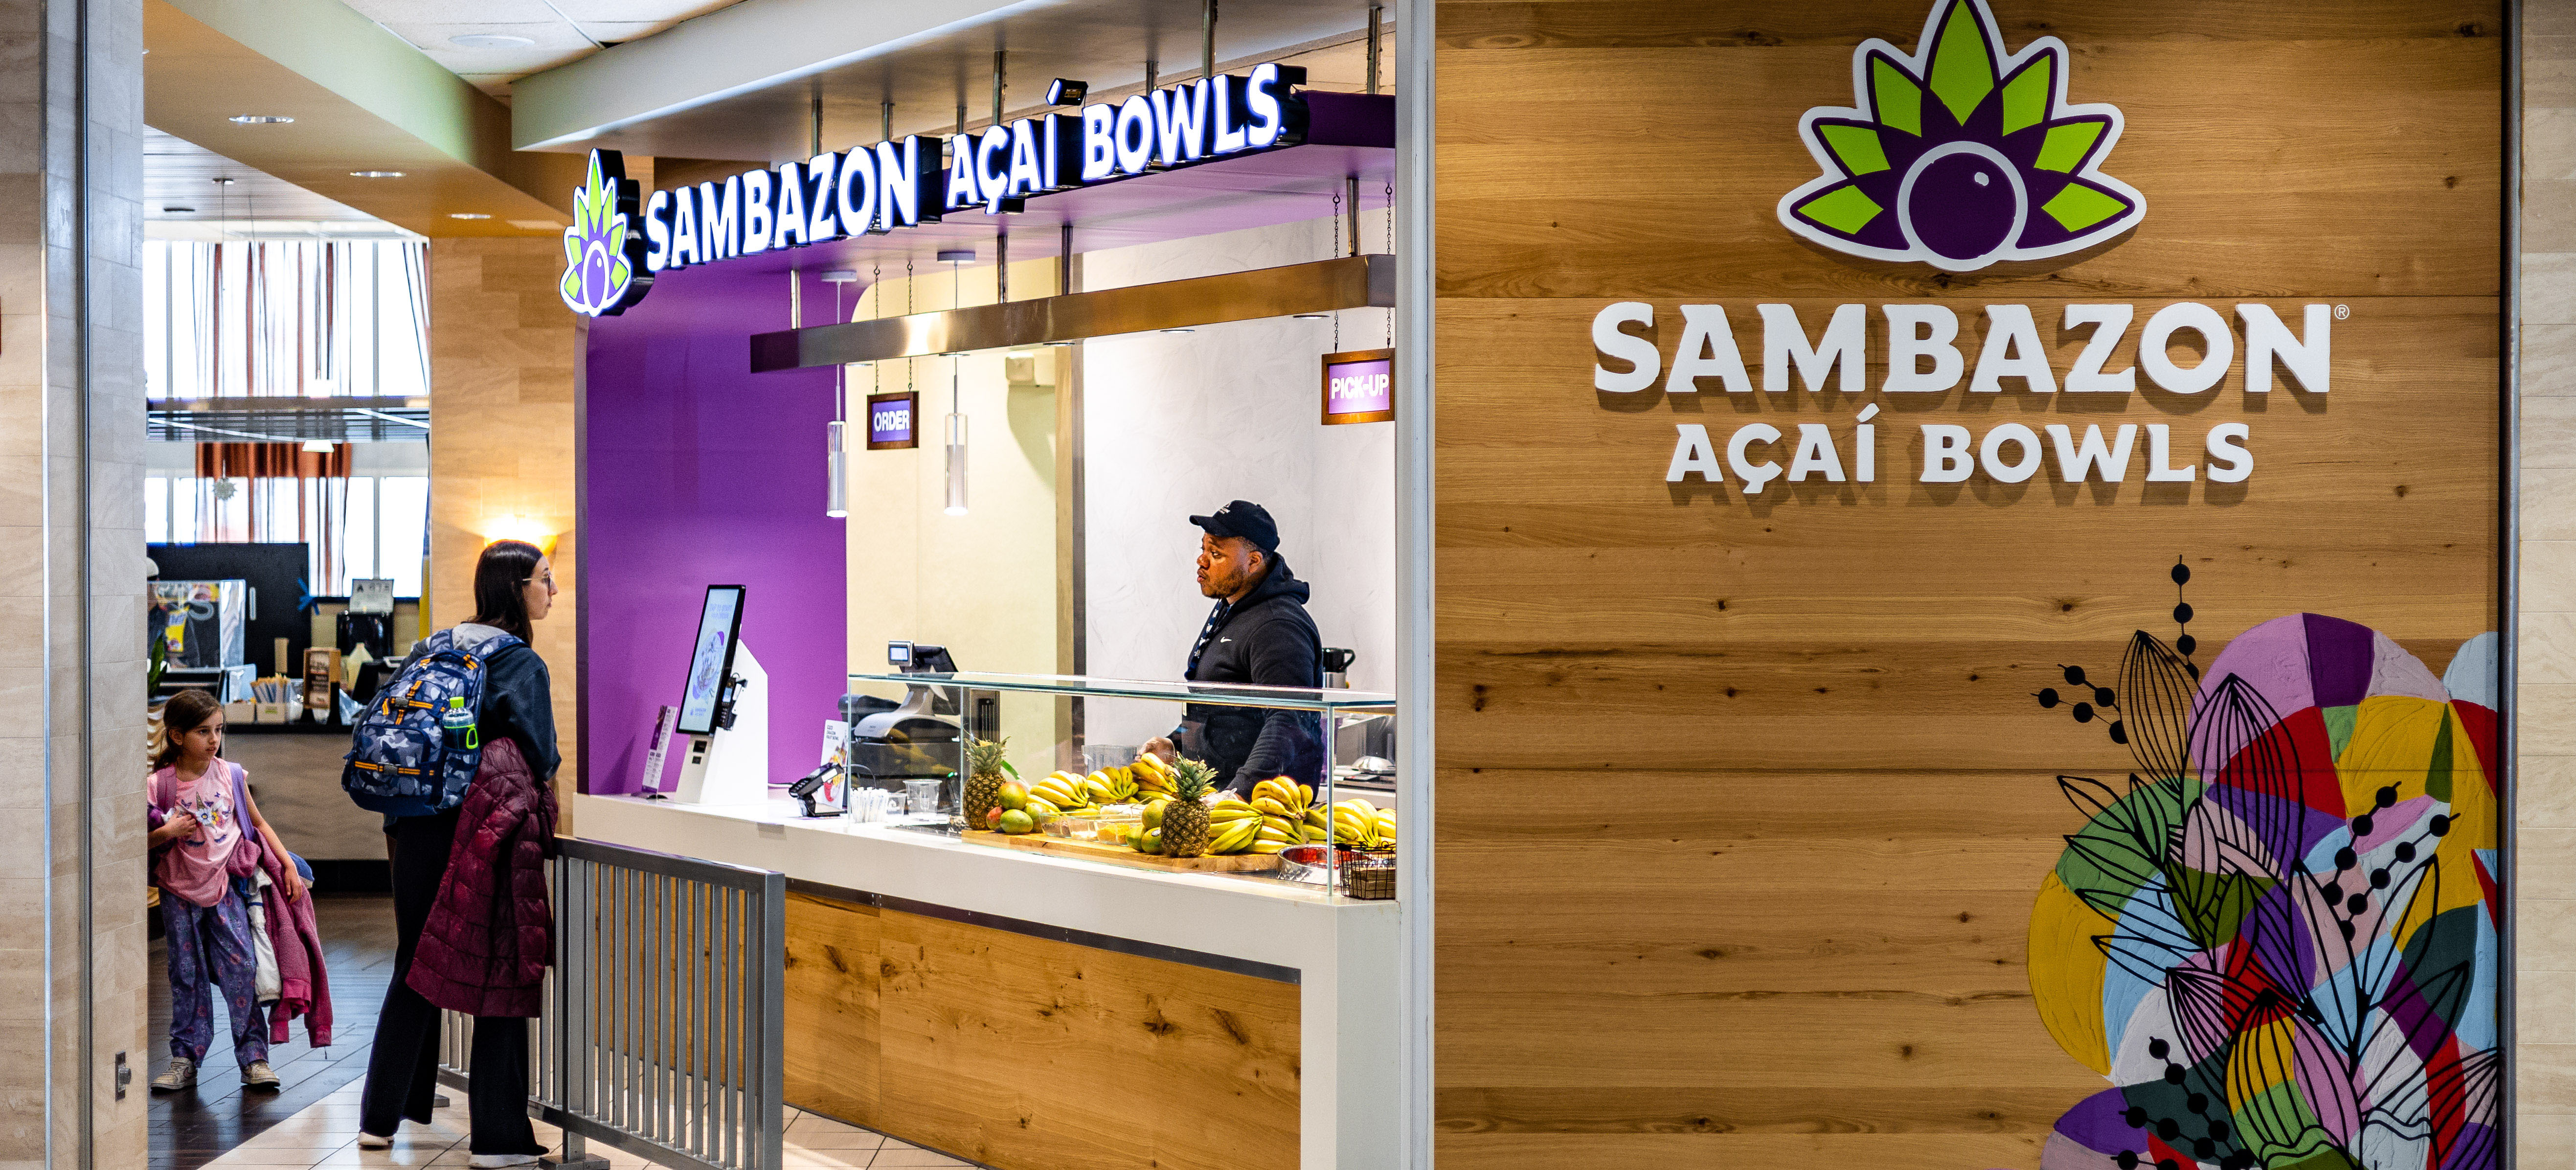 Sambazon Acai Bowls storefront in CLT Airport, employees and passengers are engaging at front counter